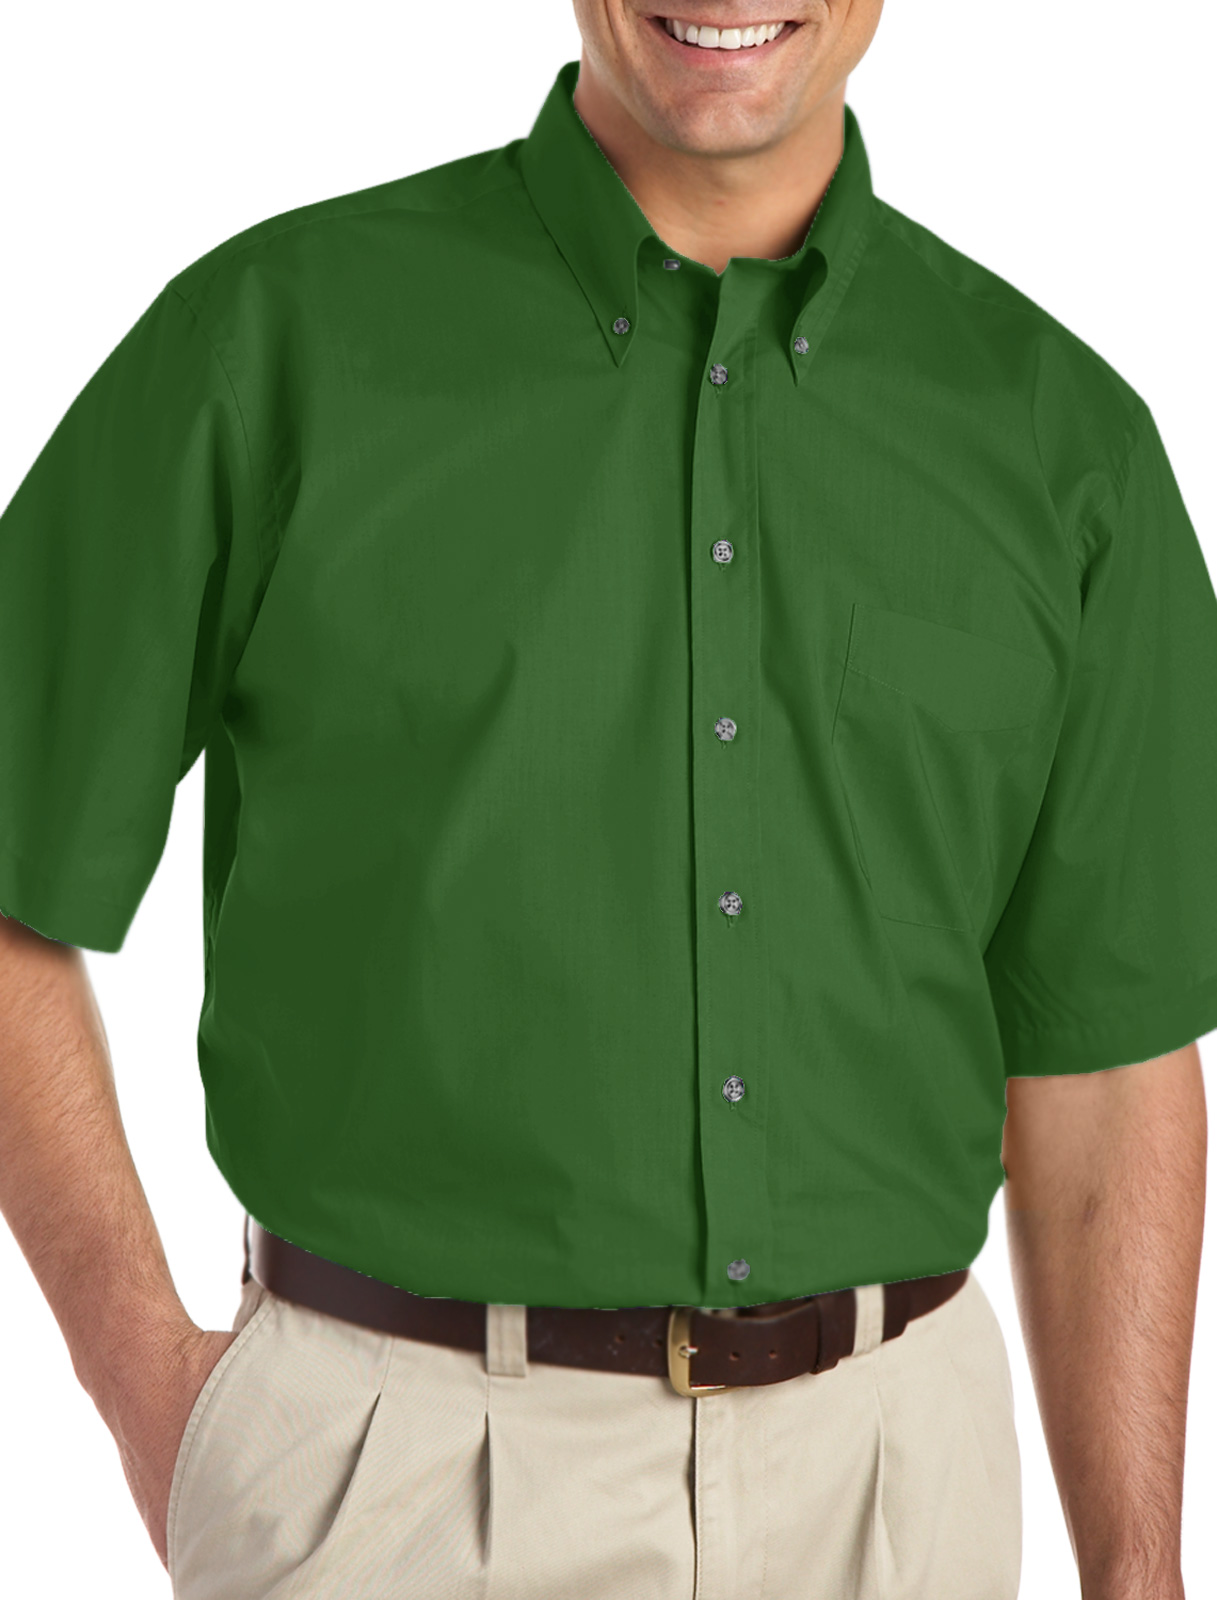 Harbor Bay Men's Big and Tall Easy-Care Solid Sport Shirt